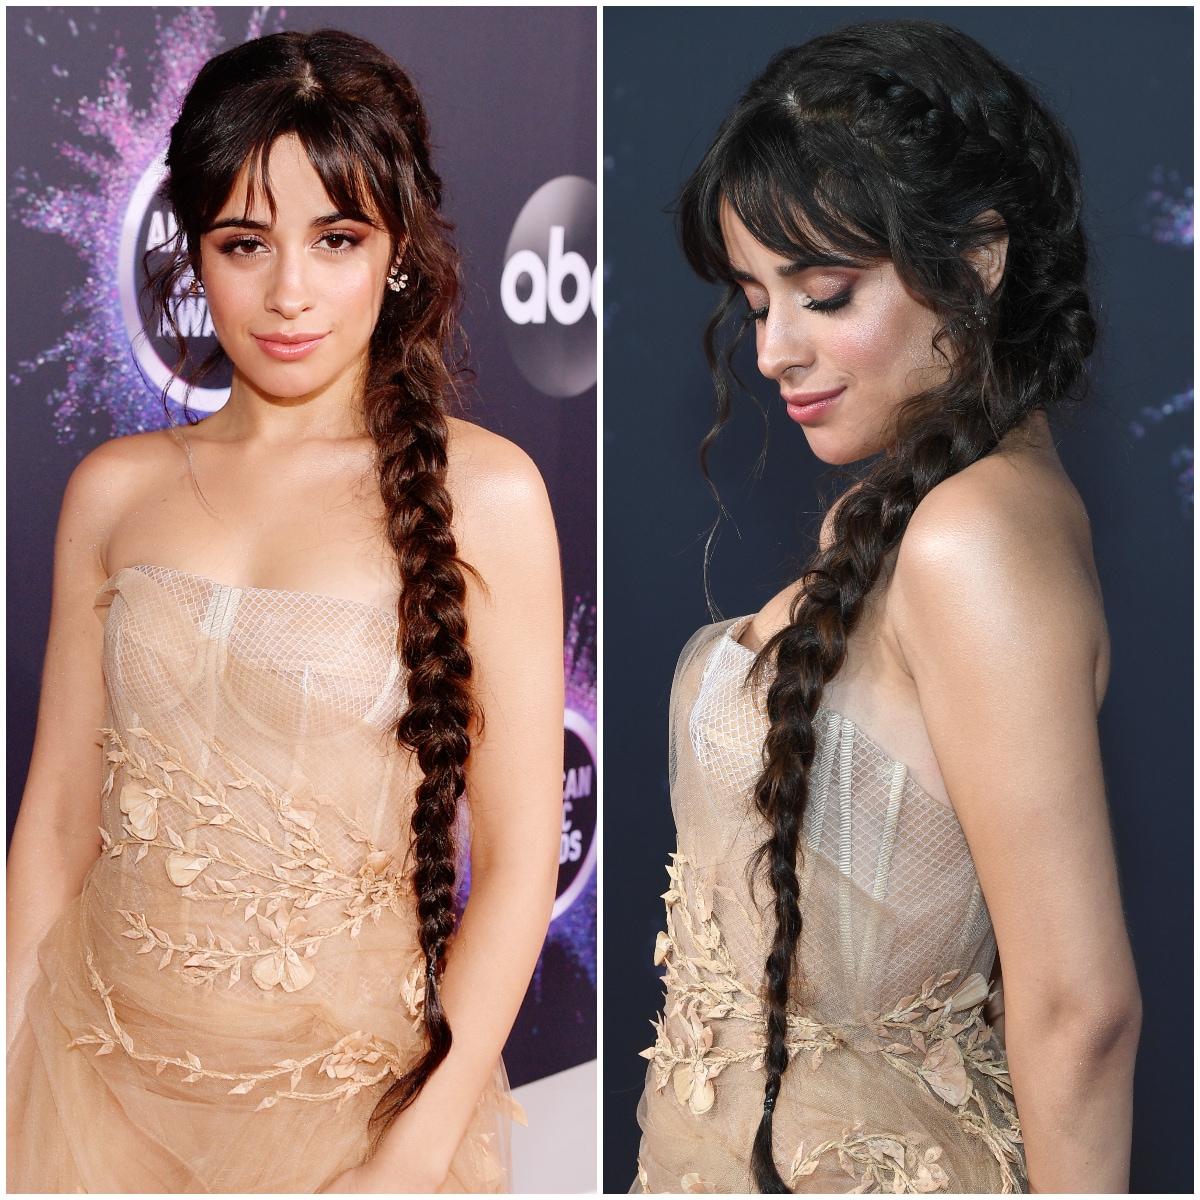 Camila Cabello turns heads at the AMAs with stunning Rapunzel-inspired braid